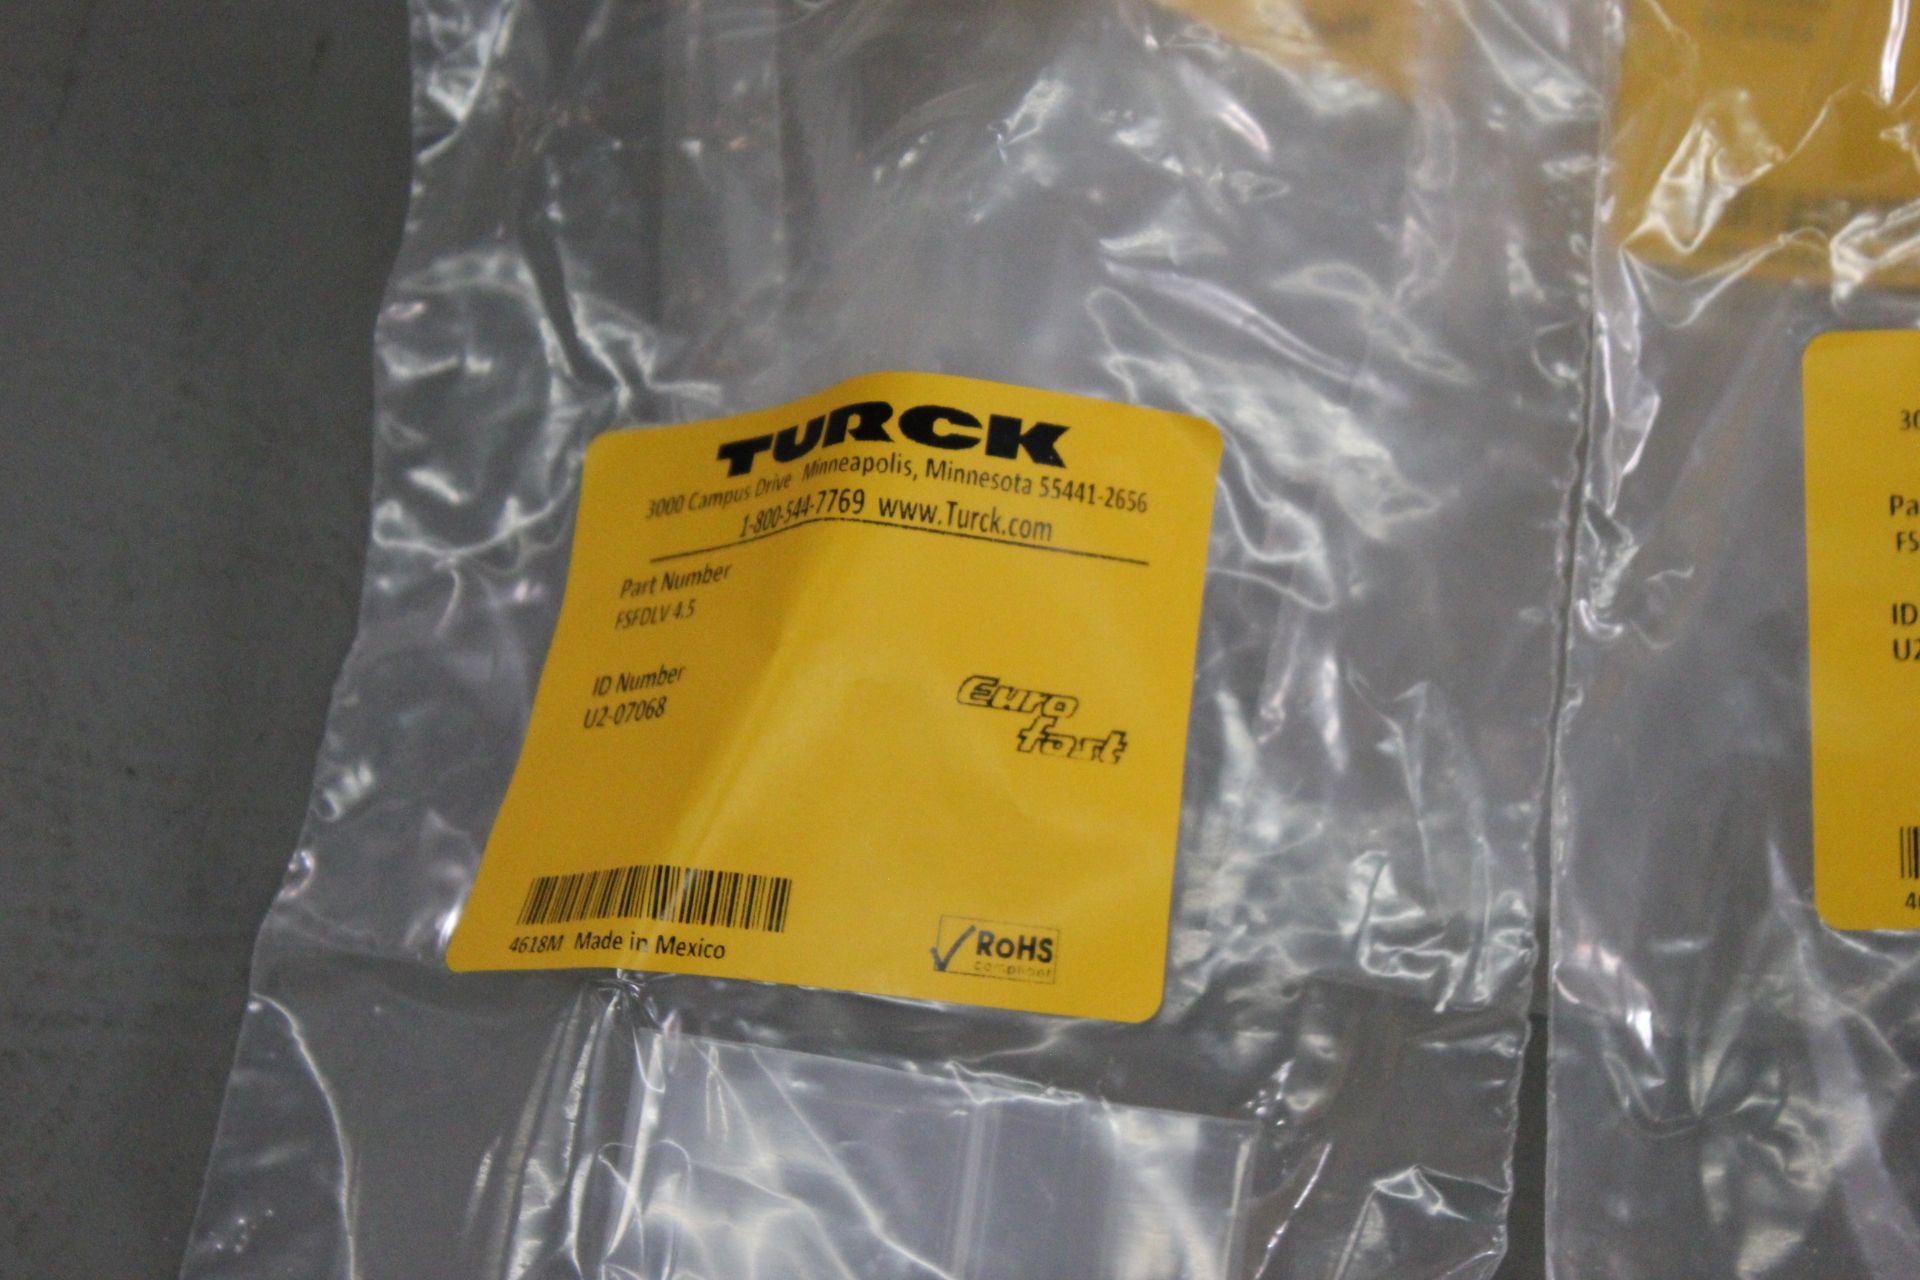 LOT OF NEW TURCK CONNECTORS - Image 2 of 3